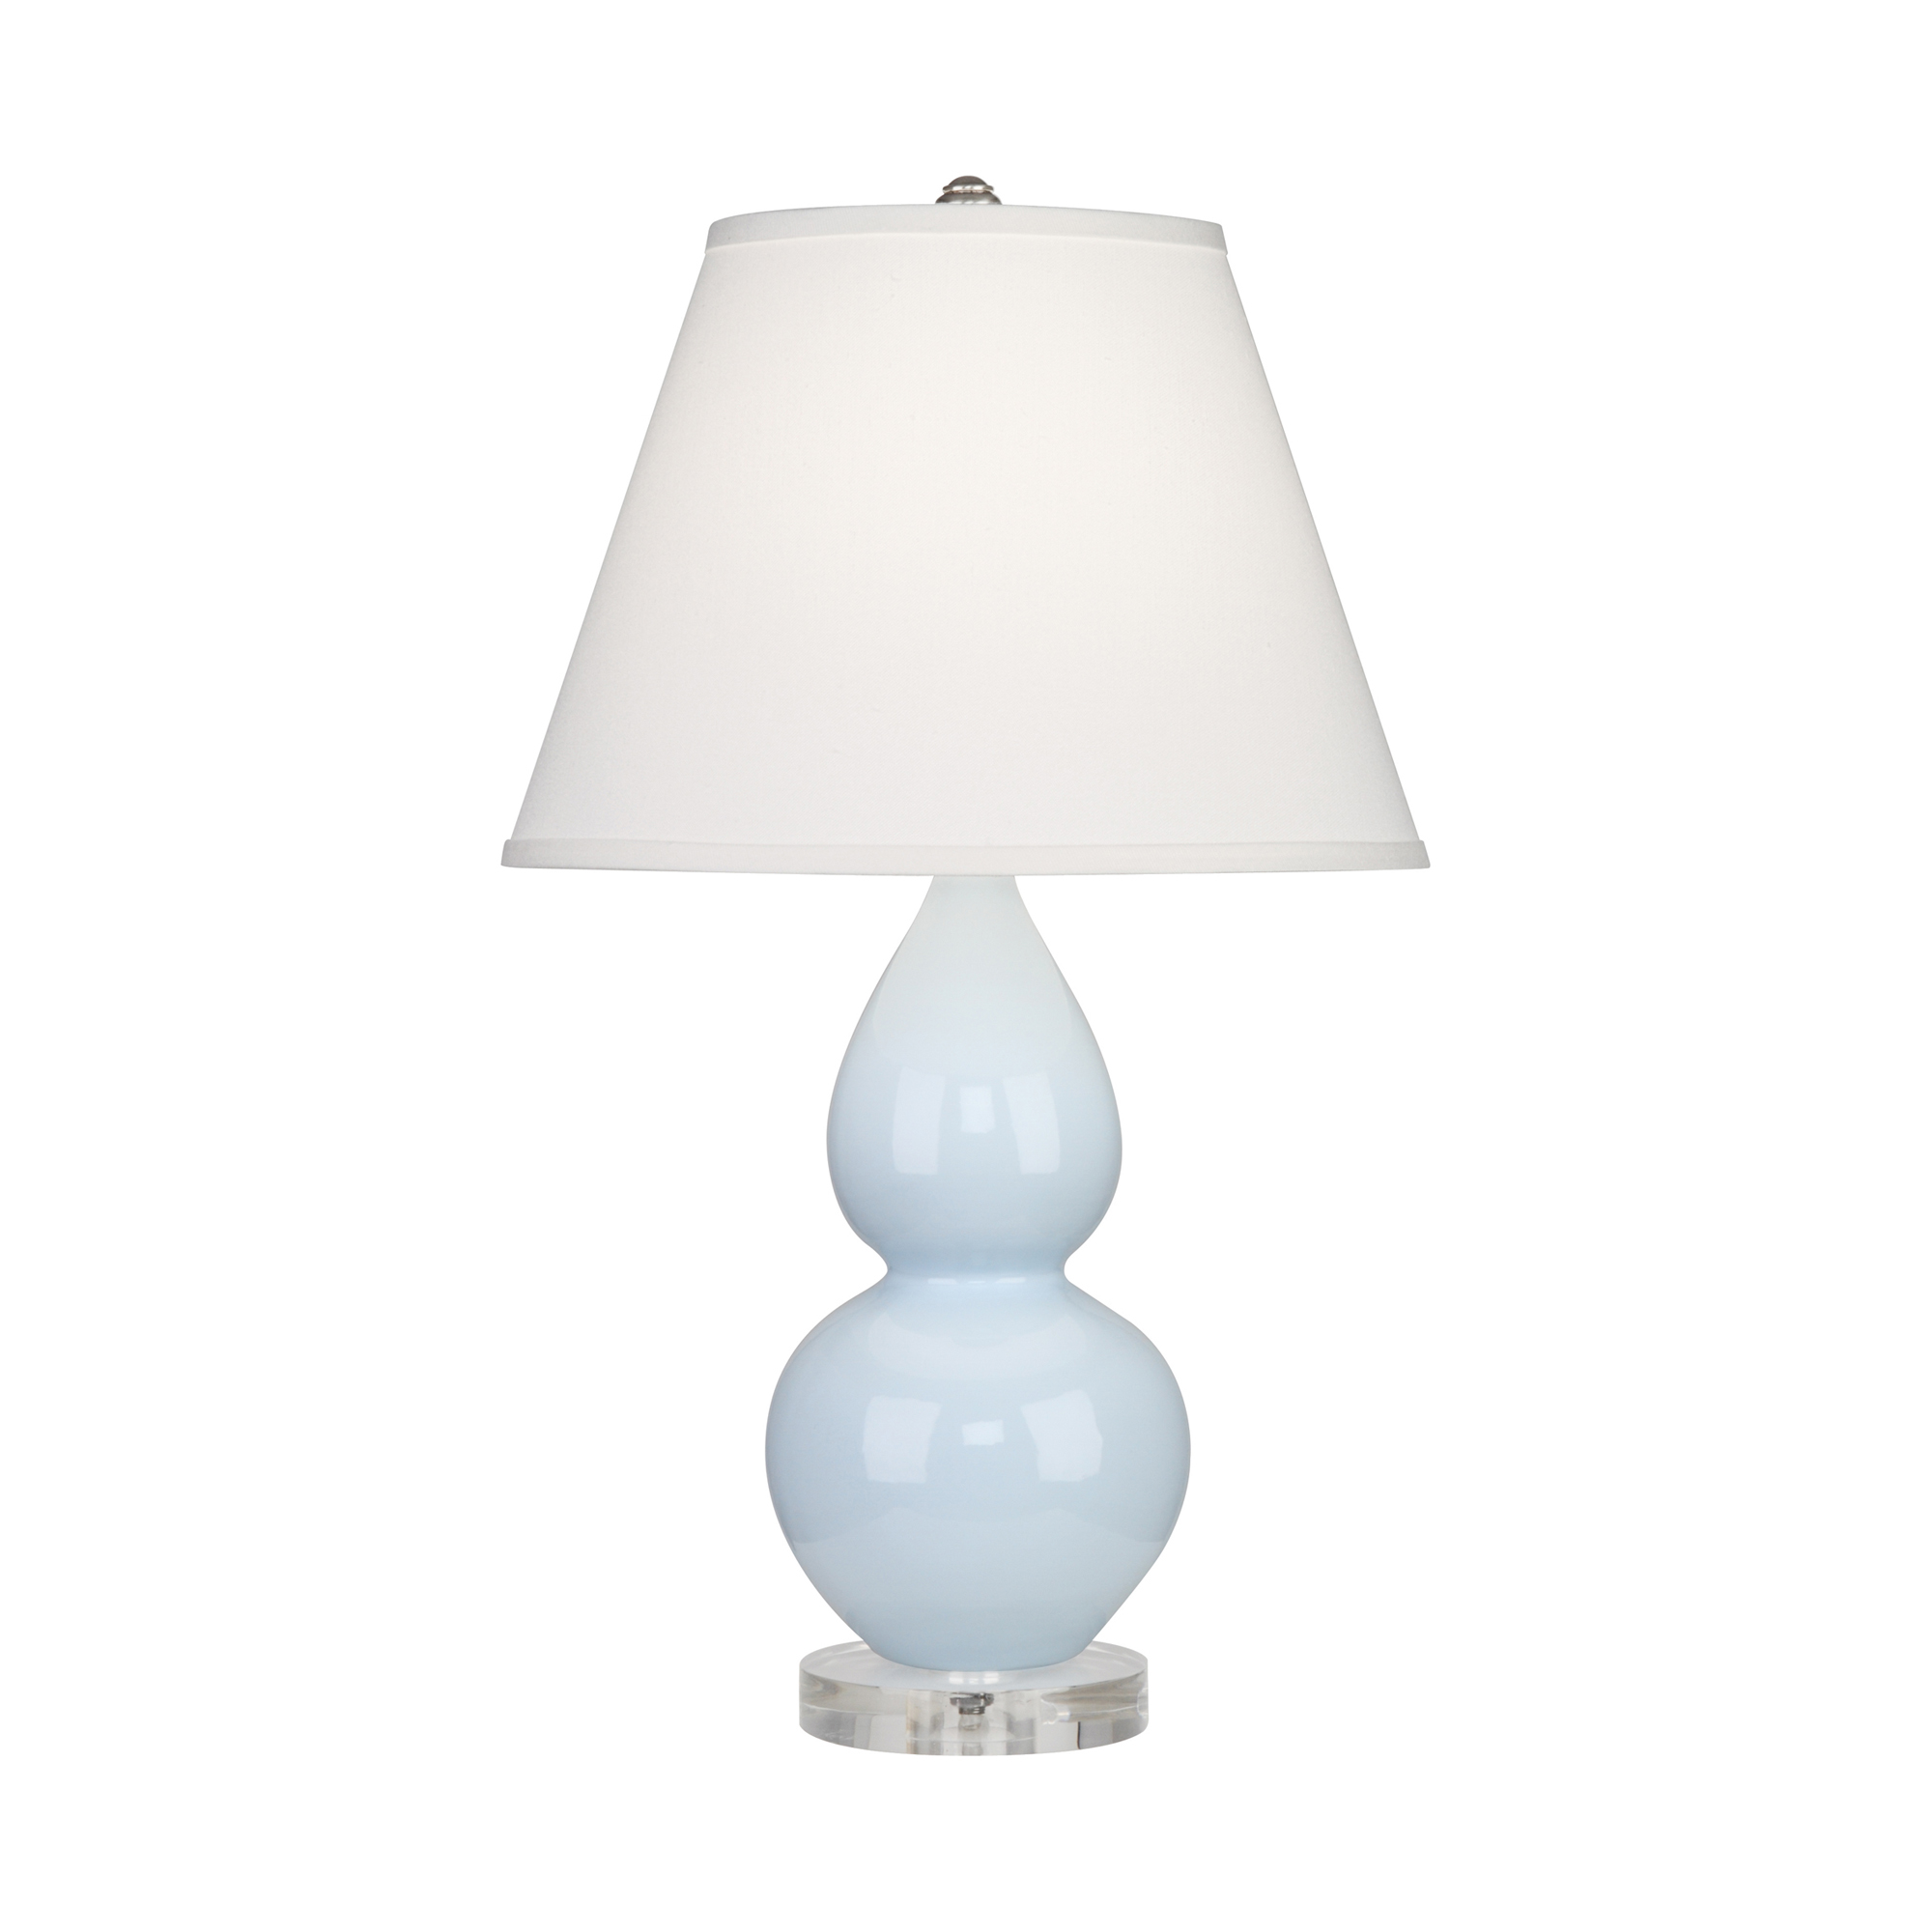 Small Double Gourd Accent Lamp Style #A696X